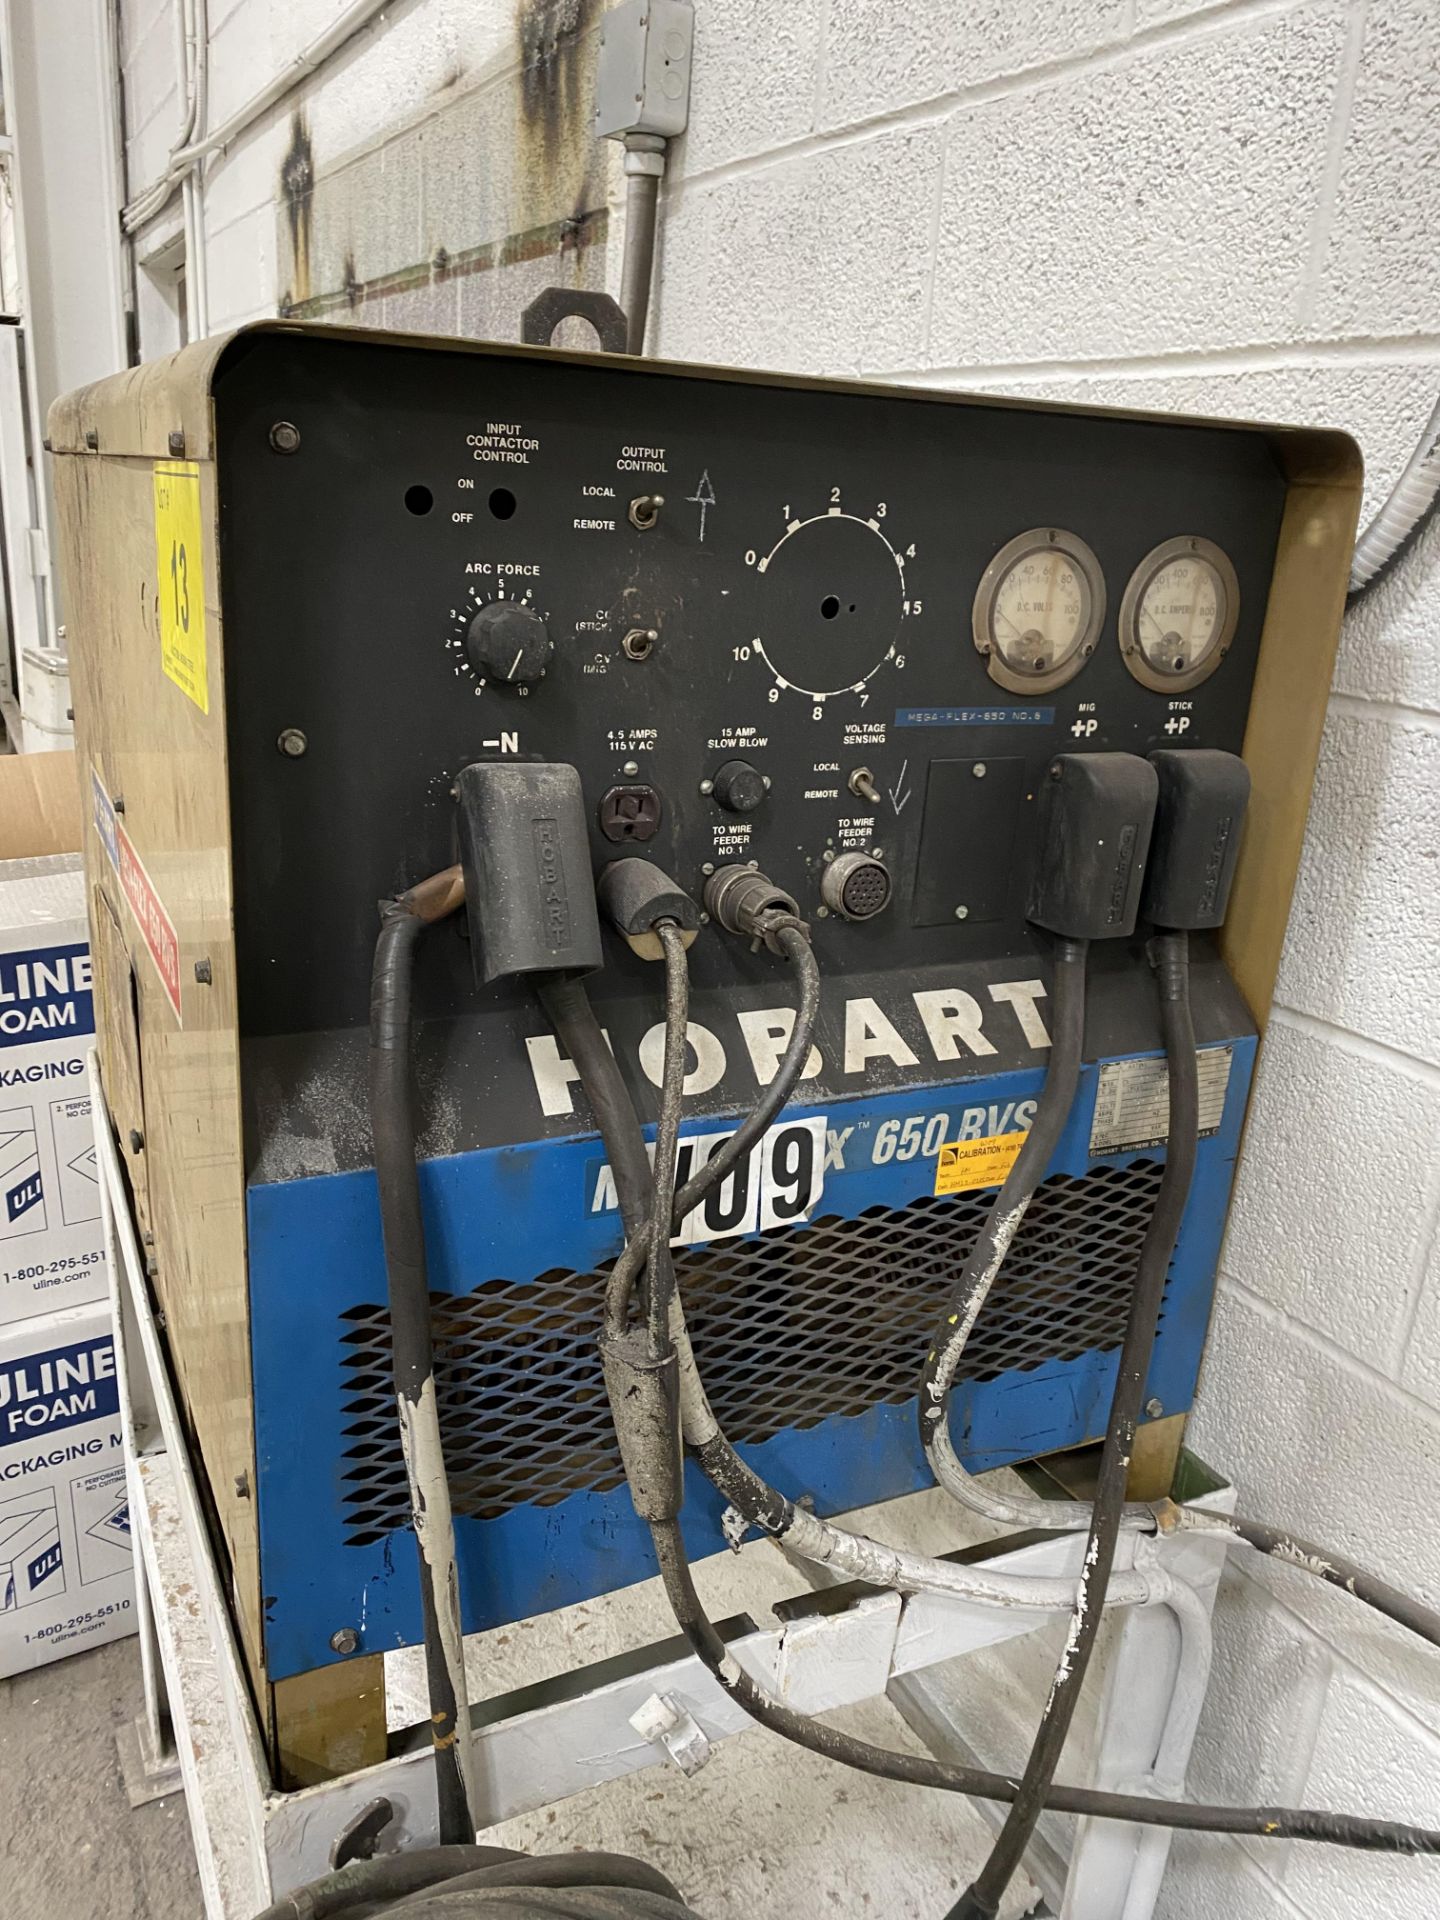 HOBART MEGA-FLEX 650 RVS MIG WELDER W/ HOBART WIRE FEEDER, CABLES AND STAND - Image 2 of 7